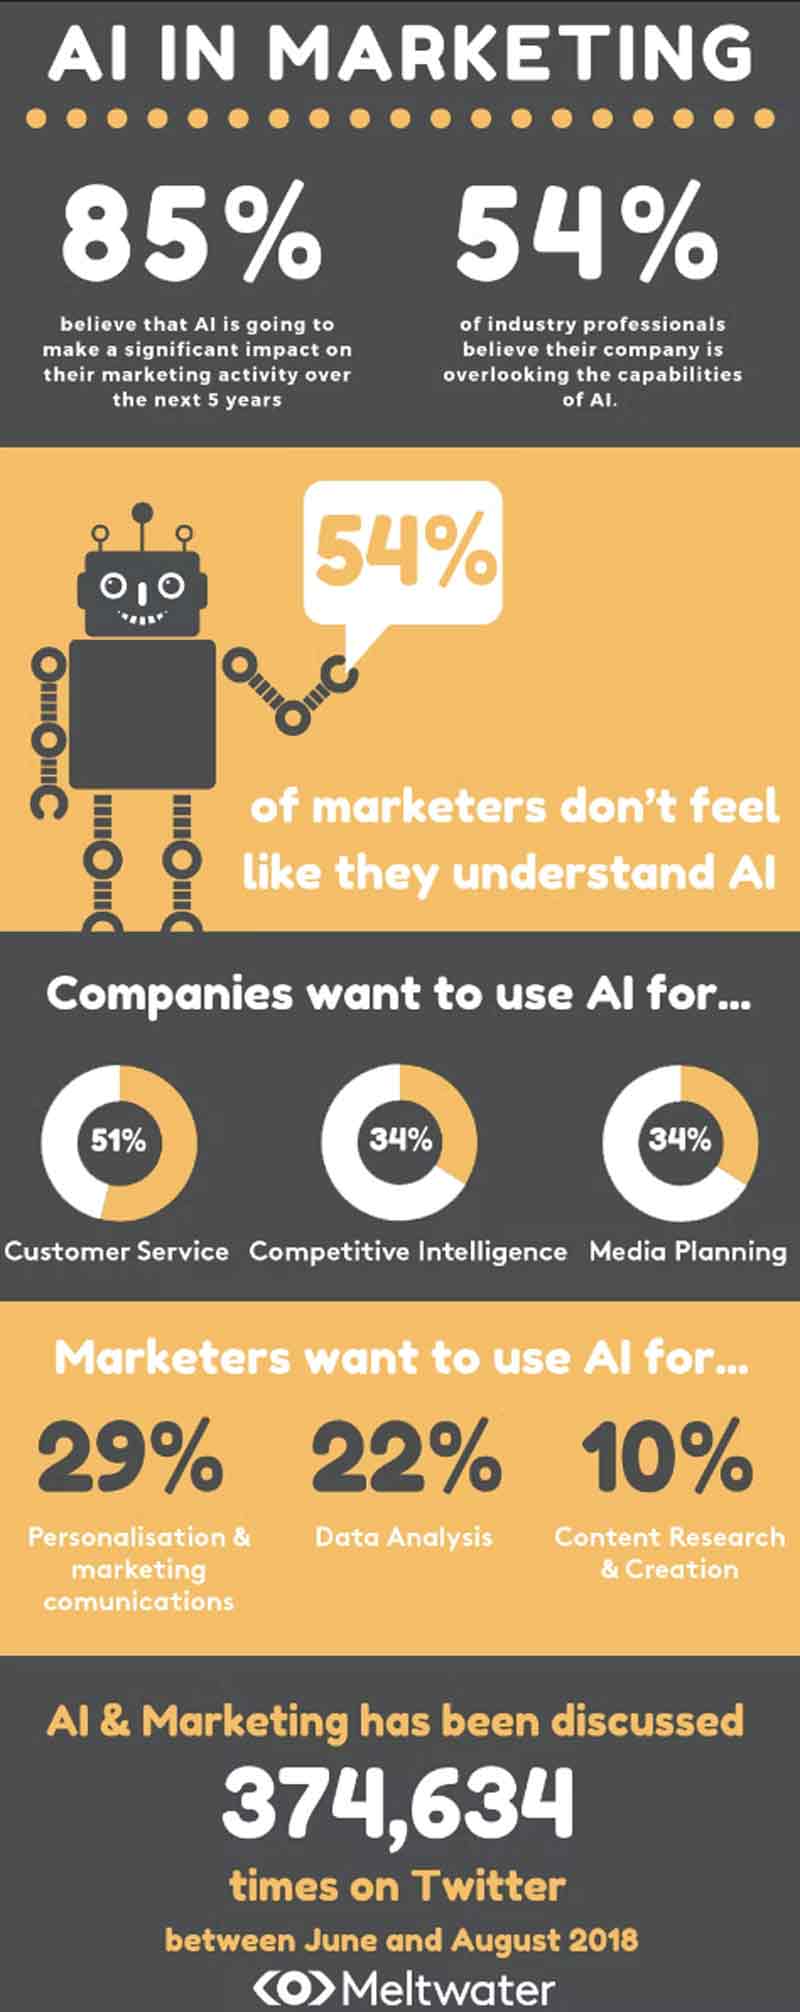 Though 85% of marketers believe AI content intelligence is useful, 54% of marketers don’t understand how it works.